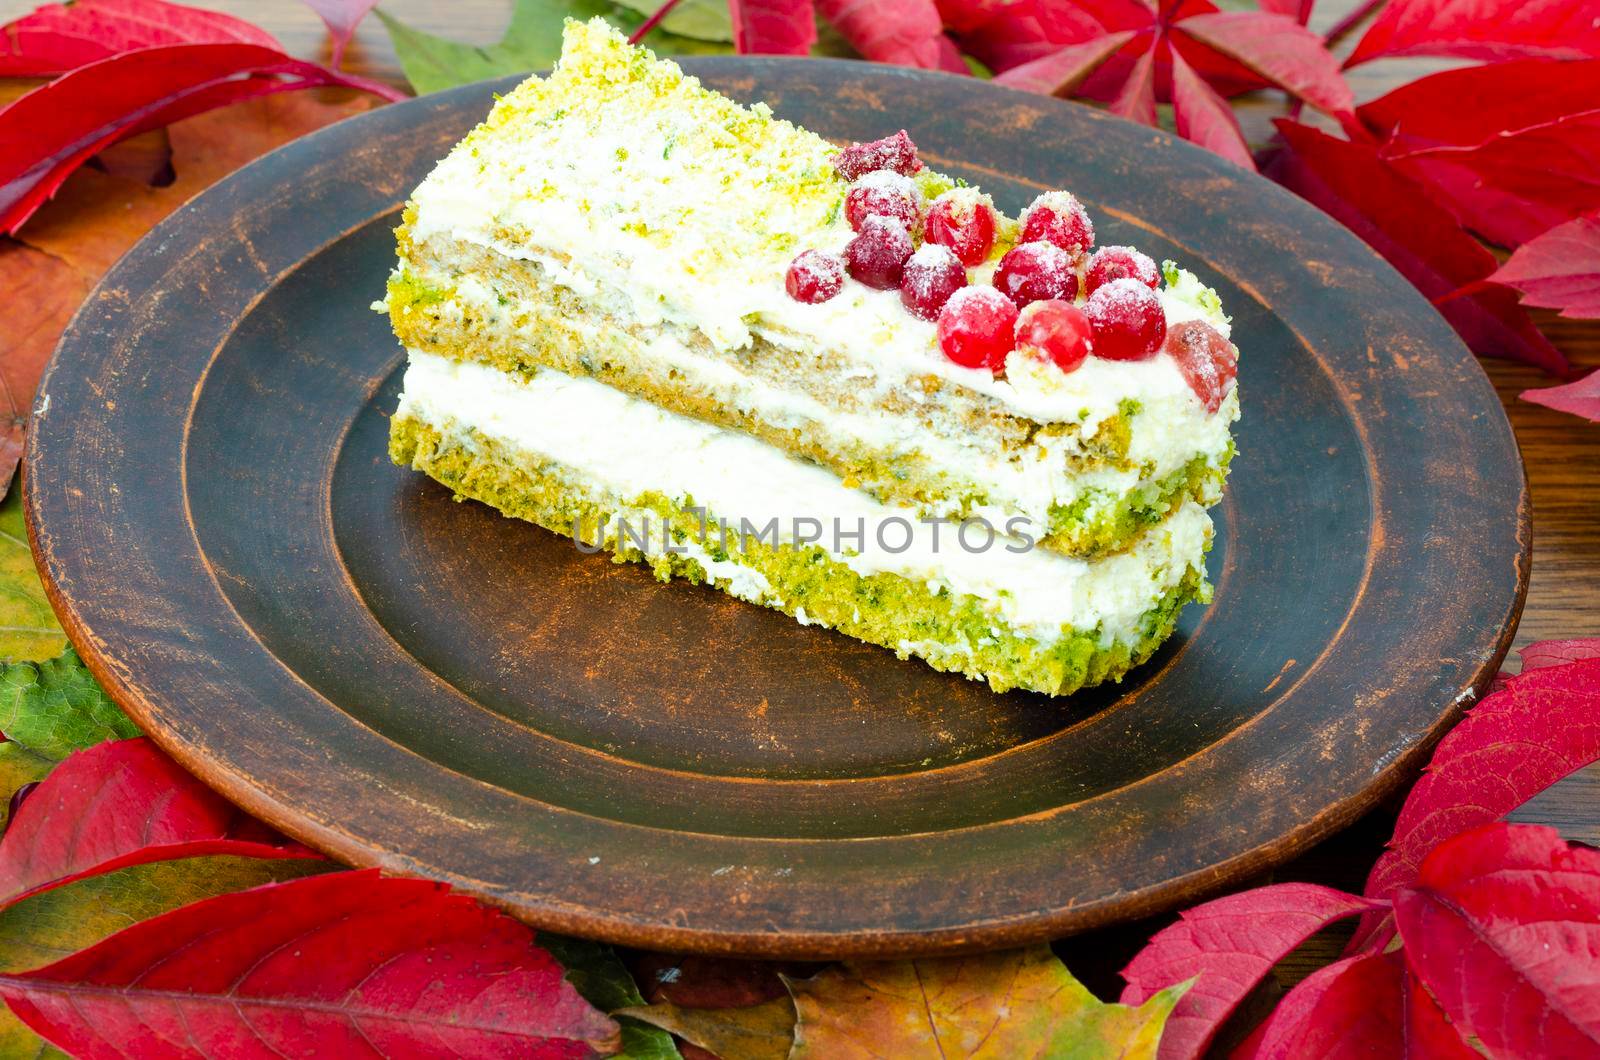 Piece of sponge cake with cream and berries on plate. Photo